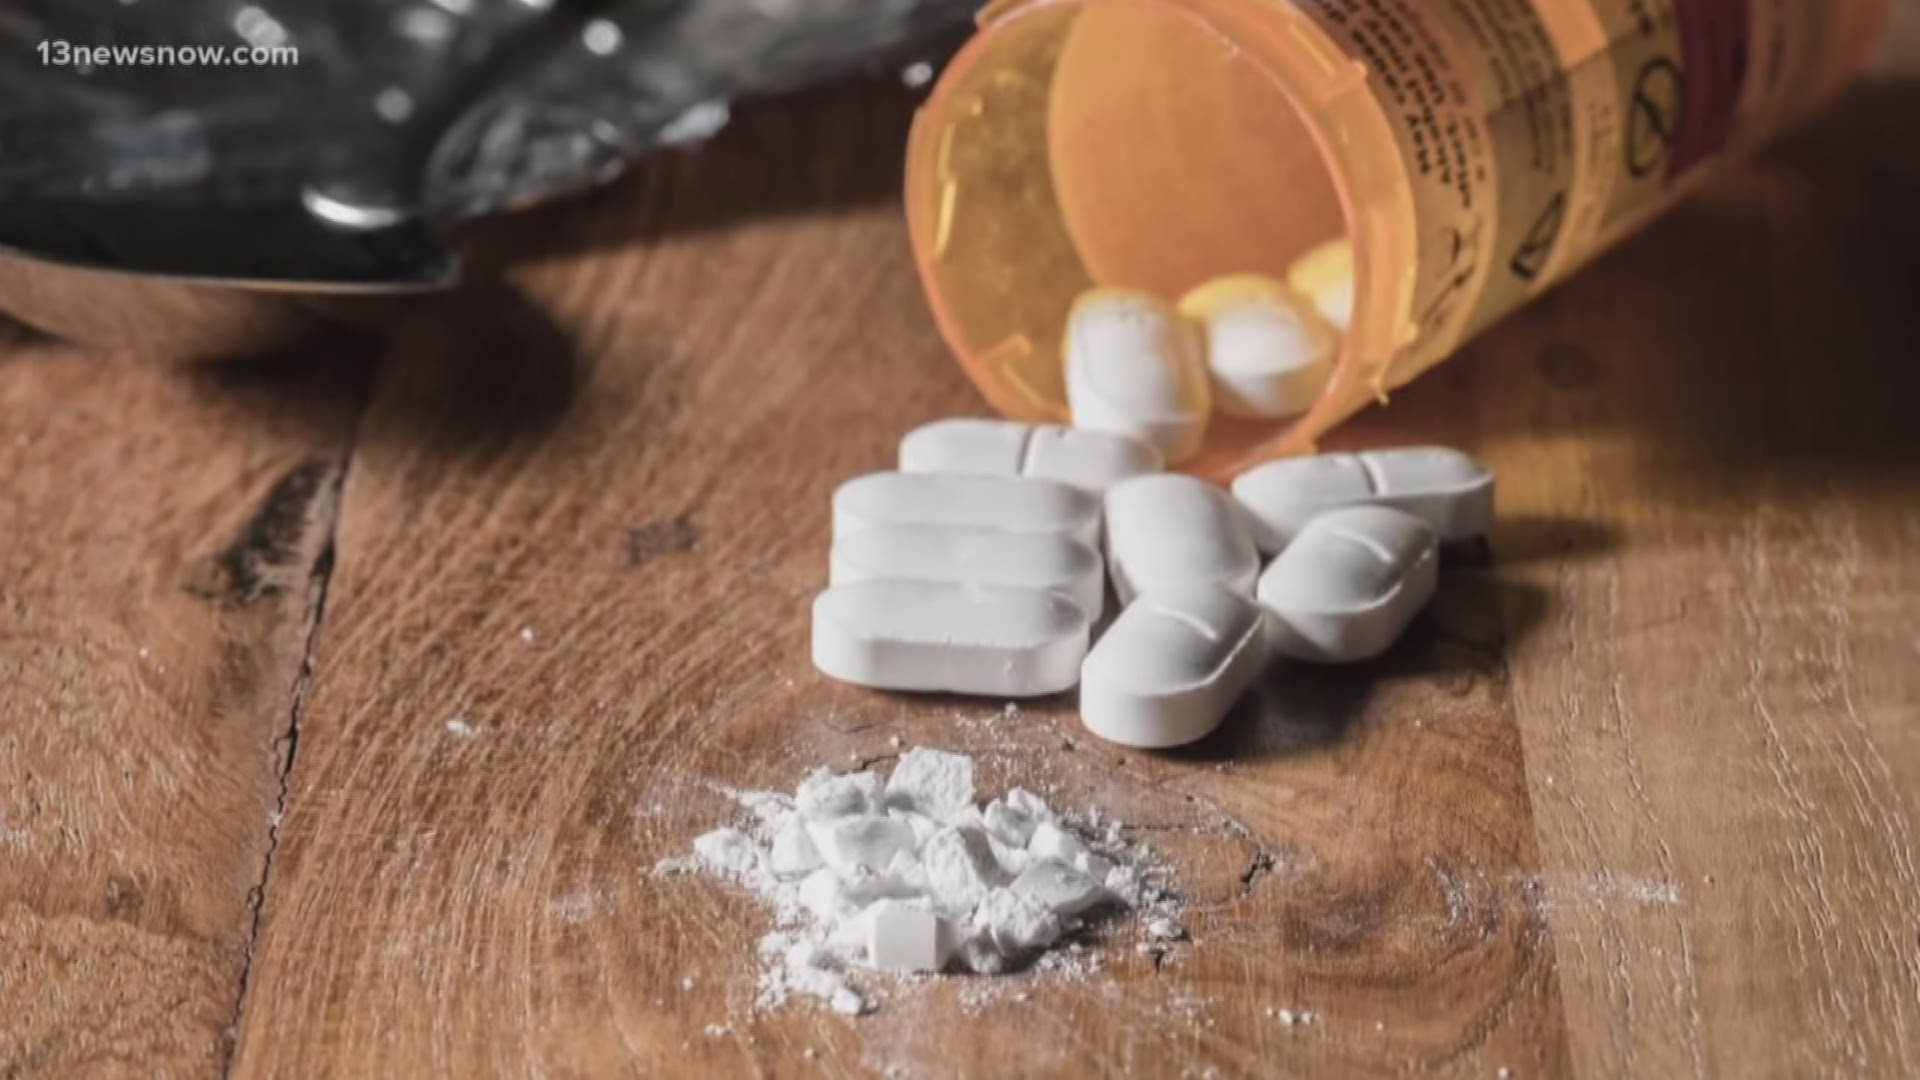 Leaders from around the area tried to estimate the economic cost of the opioid epidemic. They estimated that it's costing the state $7.6 billion.